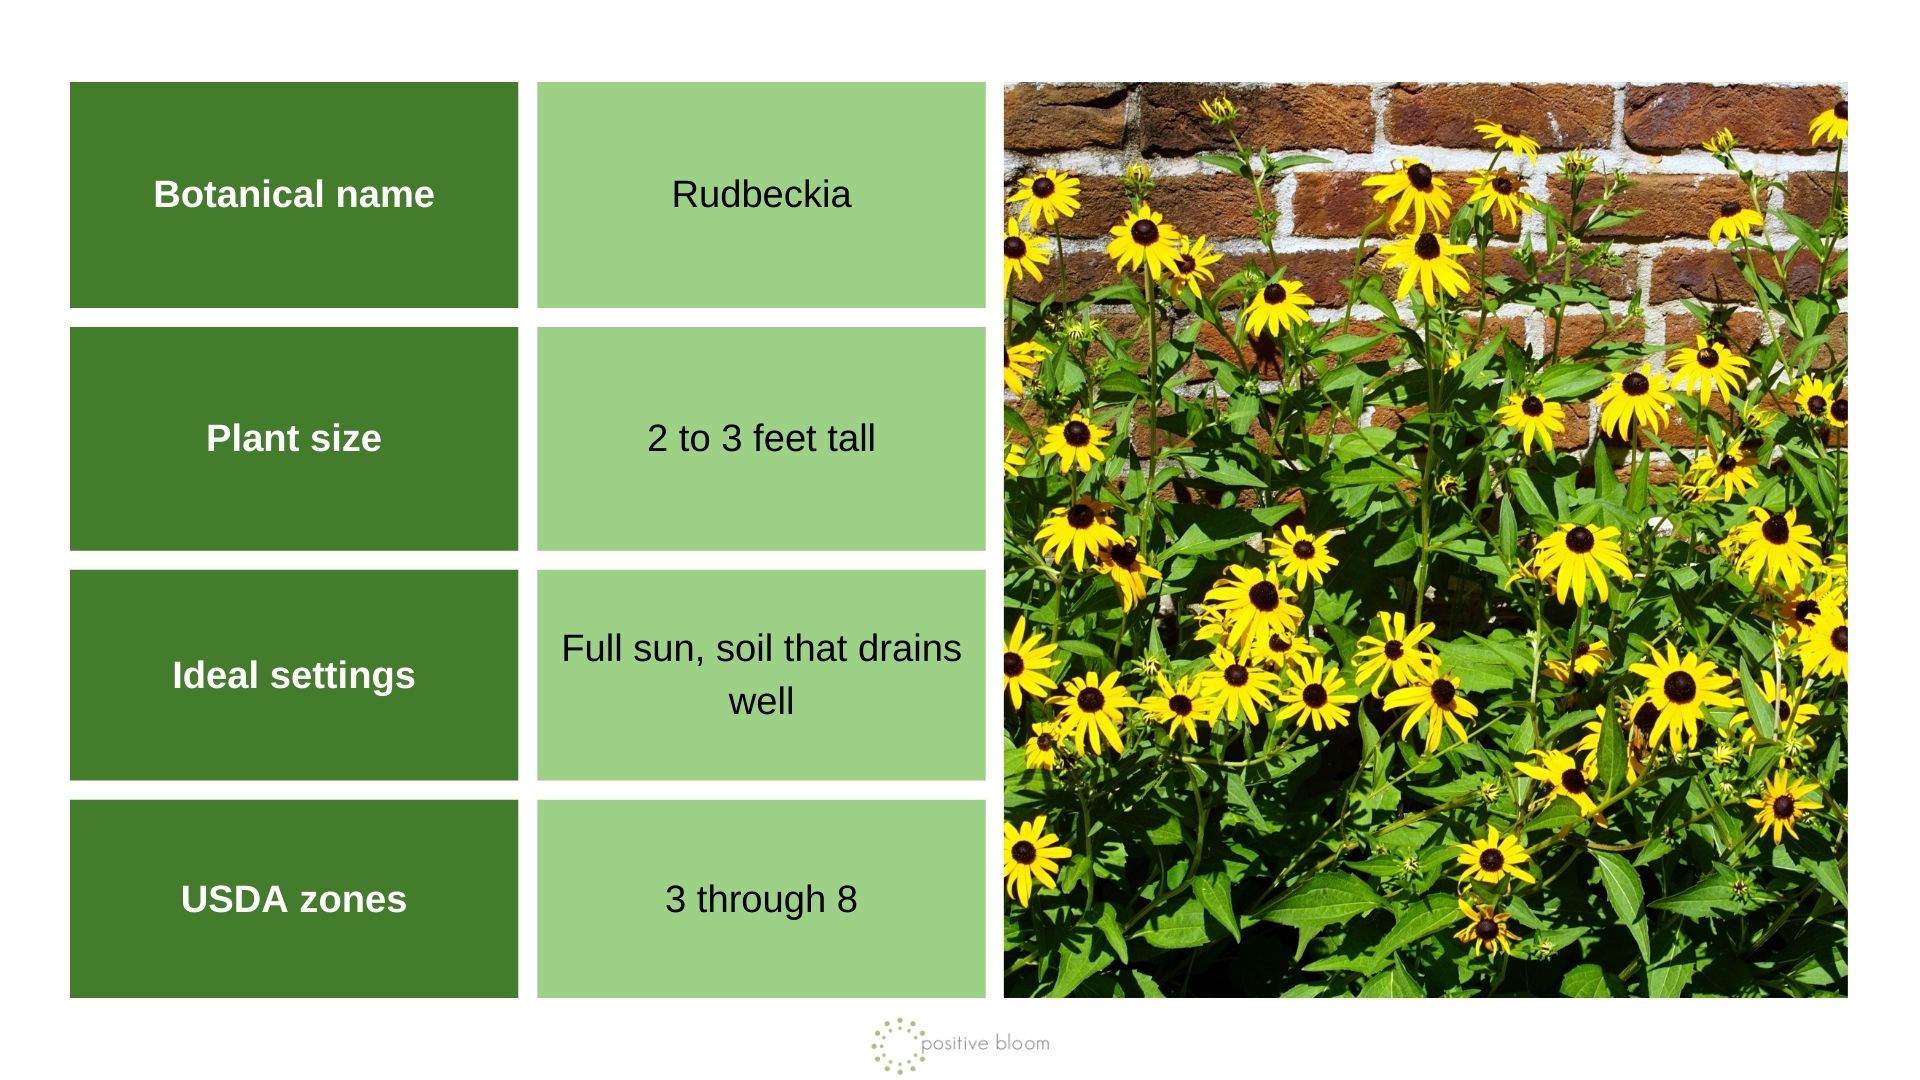 Black-eyed Susan info chart and photo